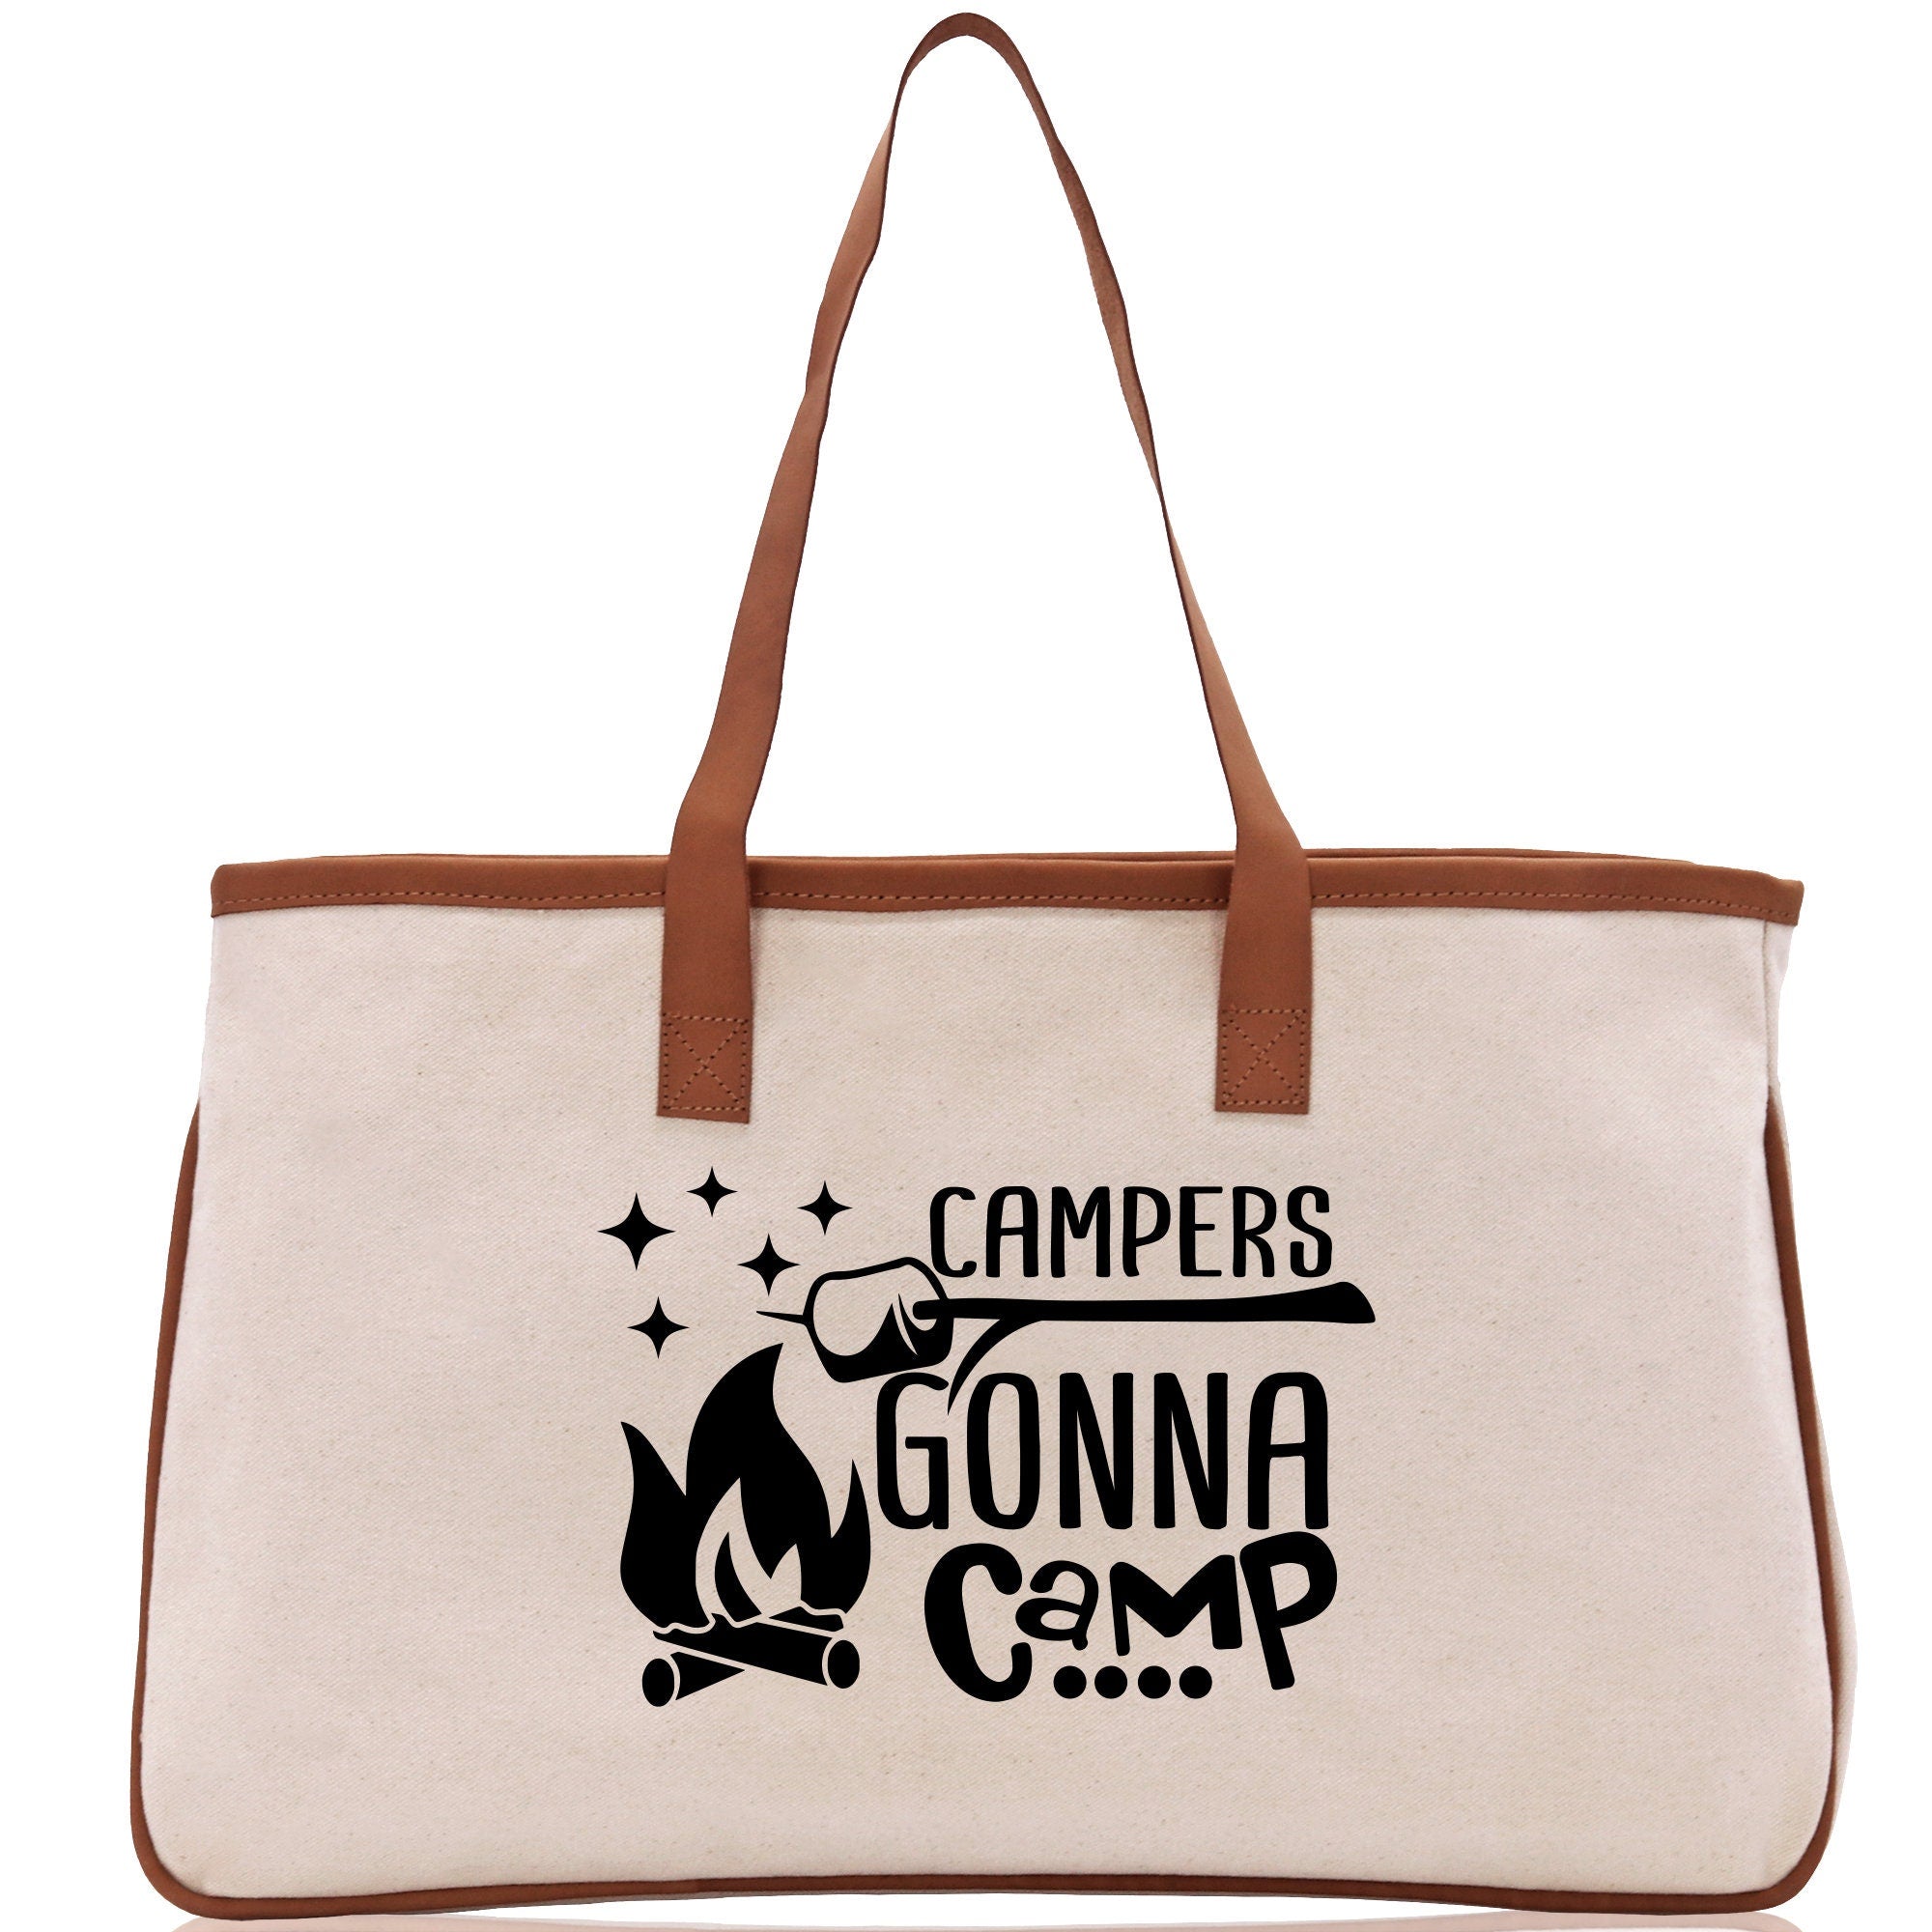 Campers Gonna Camp Cotton Canvas Chic Tote Bag Camping Tote Camping Lover Gift Tote Bag Outdoor Tote Weekender Tote Camper Multipurpose Tote